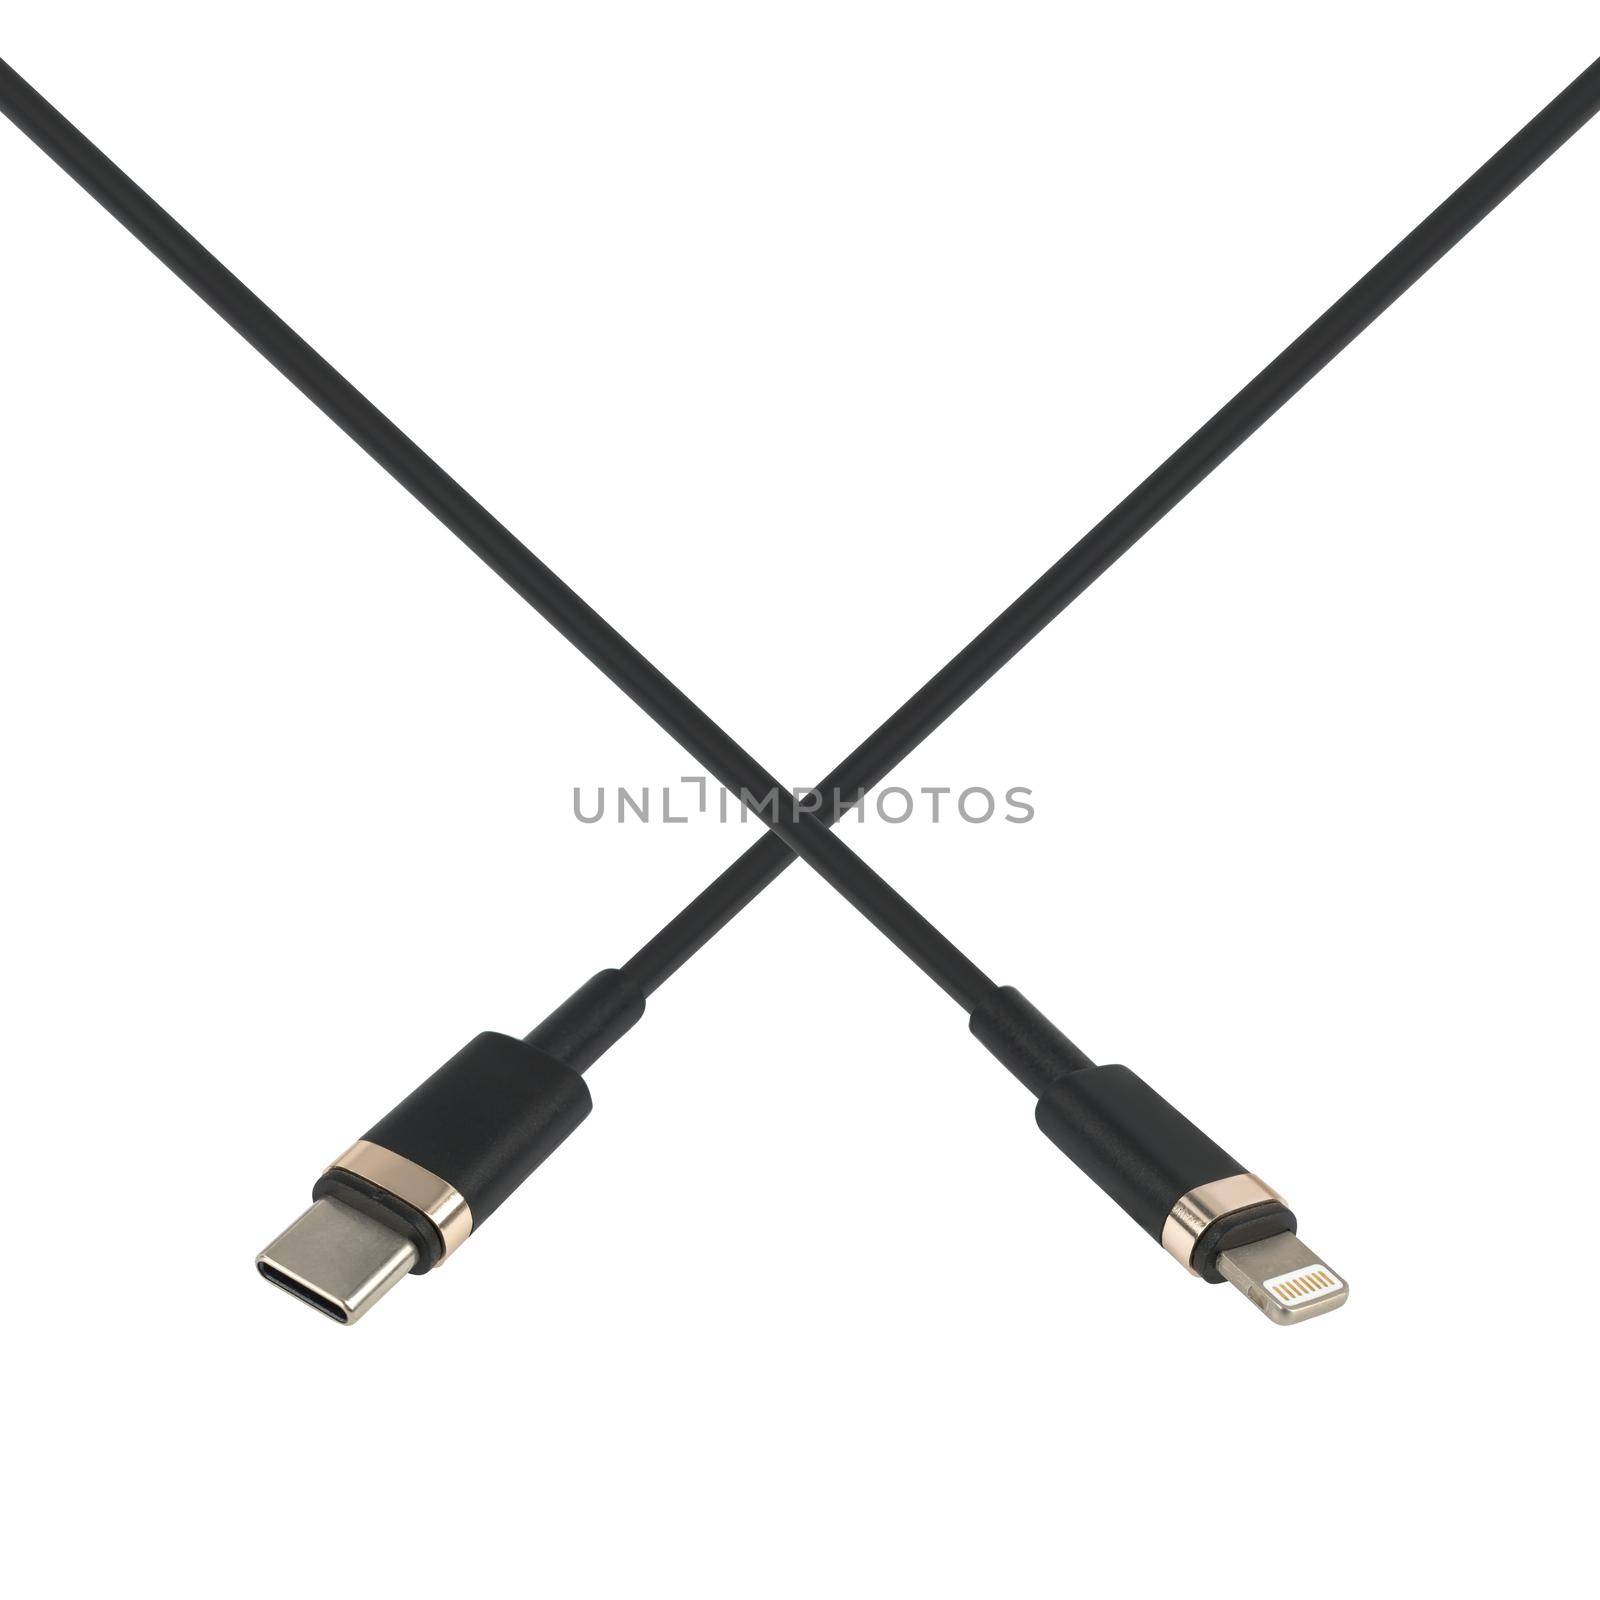 cable with Type-C and Lightning connector, on white background